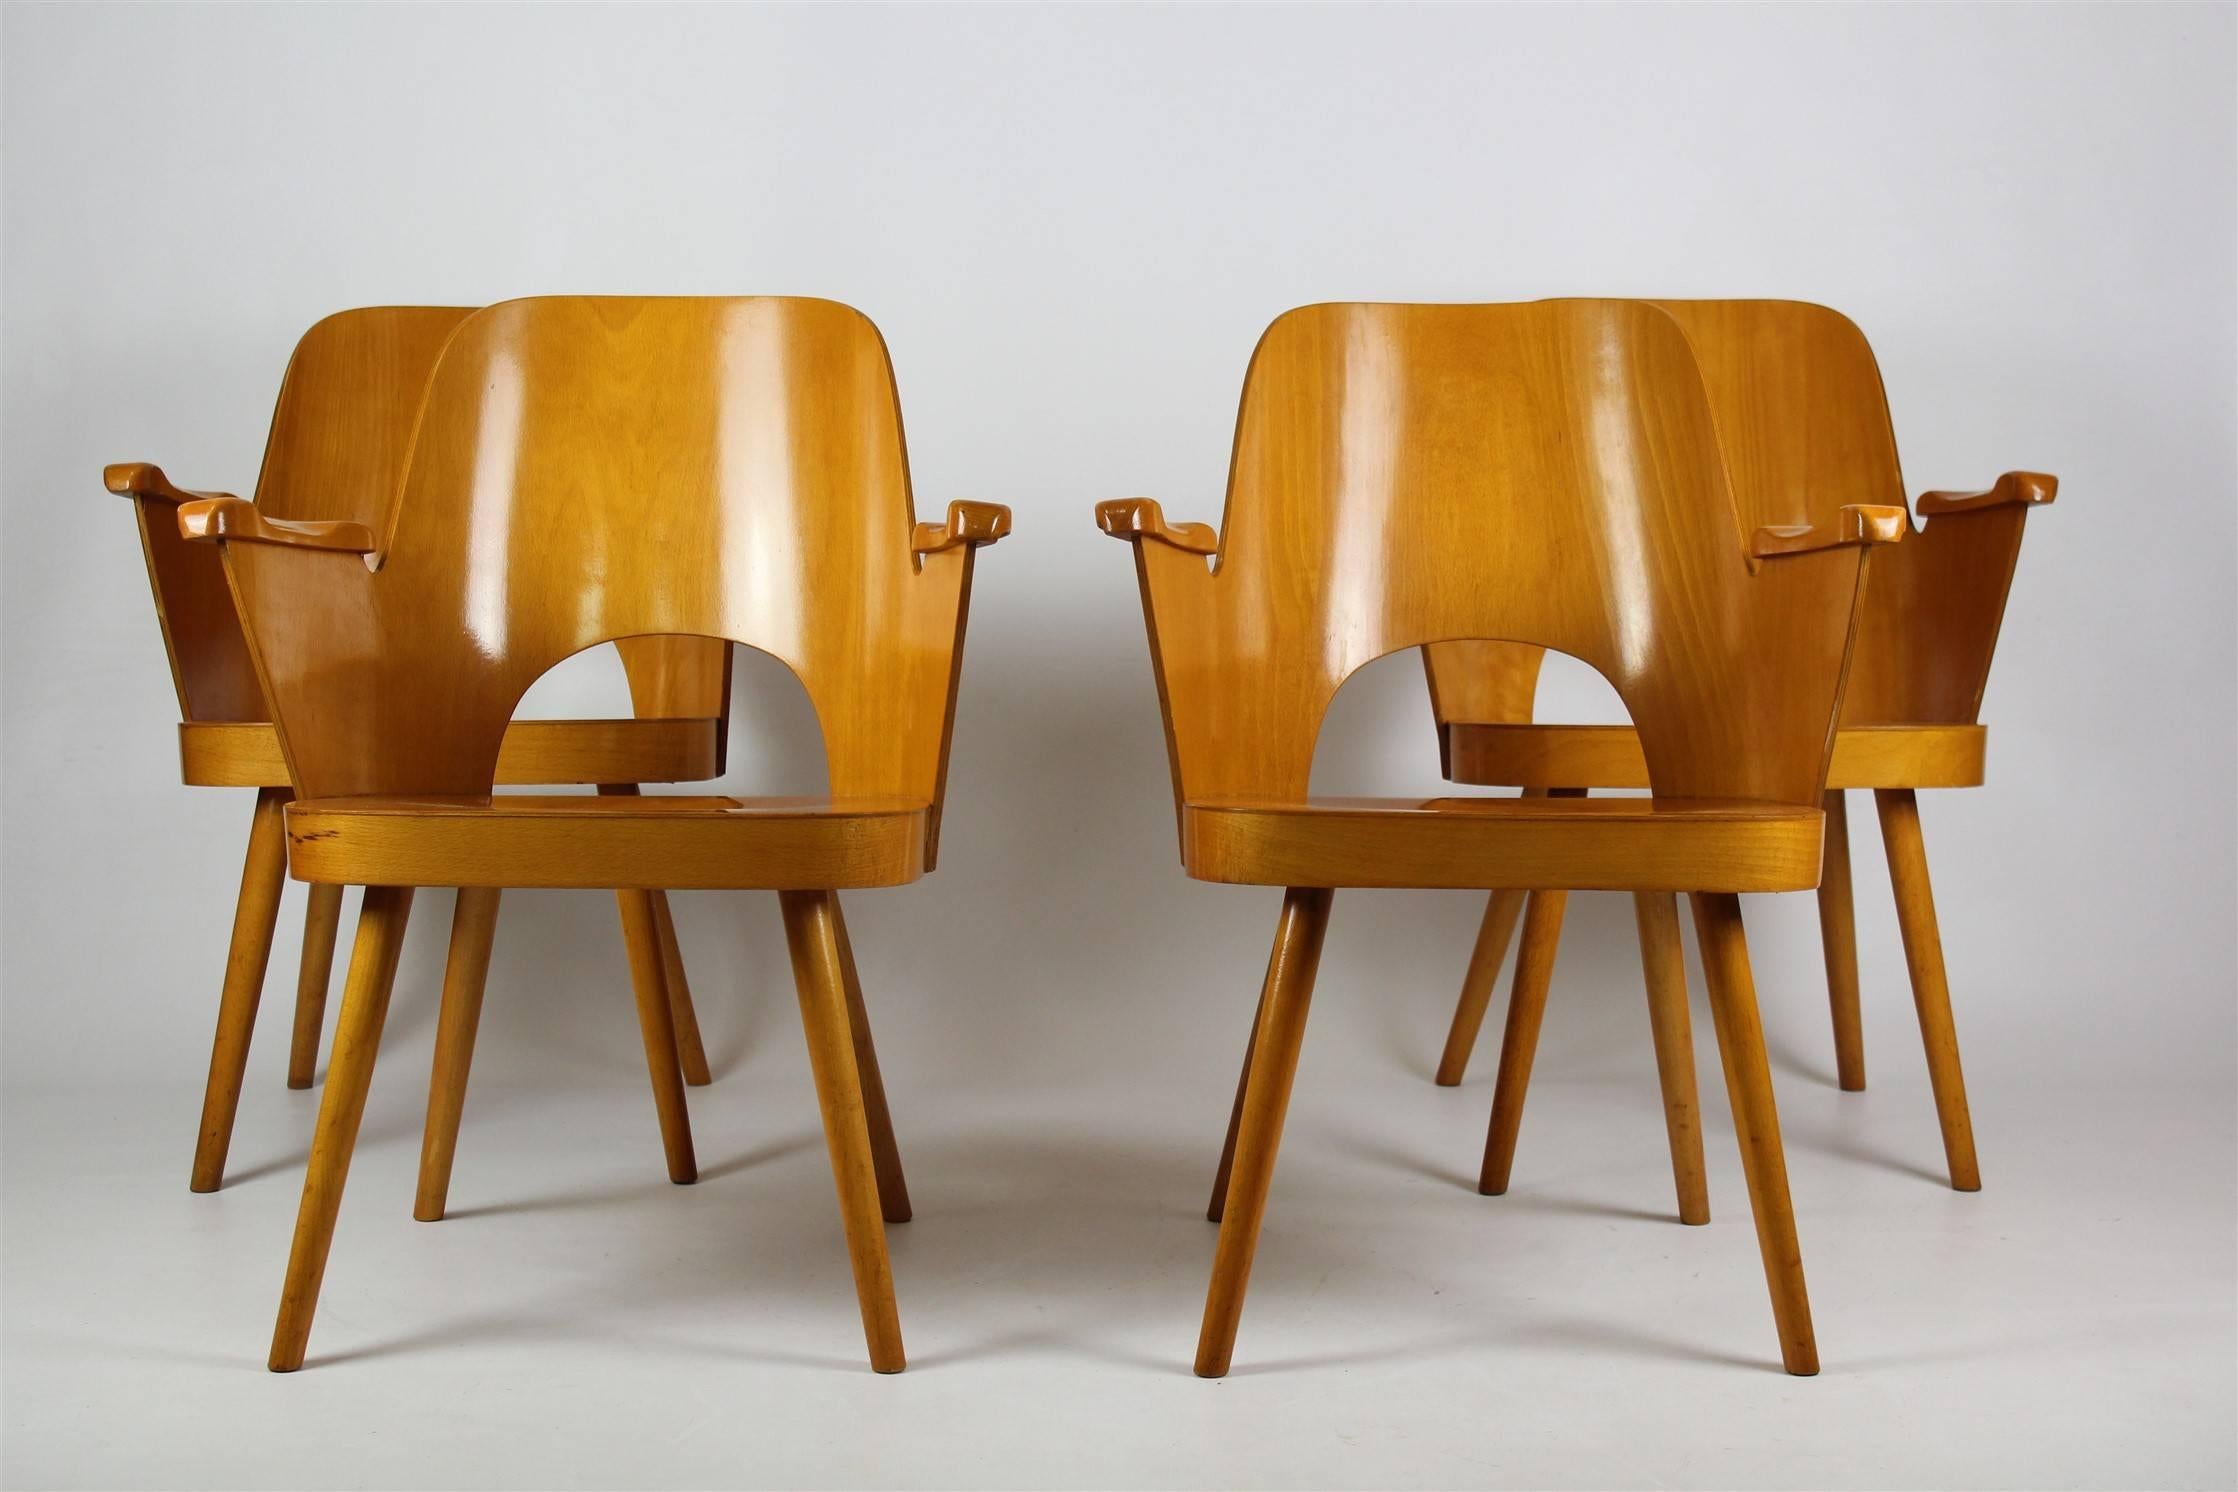 These chairs were designed by Lubomír Hofmann and produced in 1961 by Ton (formerly Thonet) in Bystrice pod Hostynem, Czech Republic.
Made of beechwood and bent plywood, kept in original, very good condition.
    